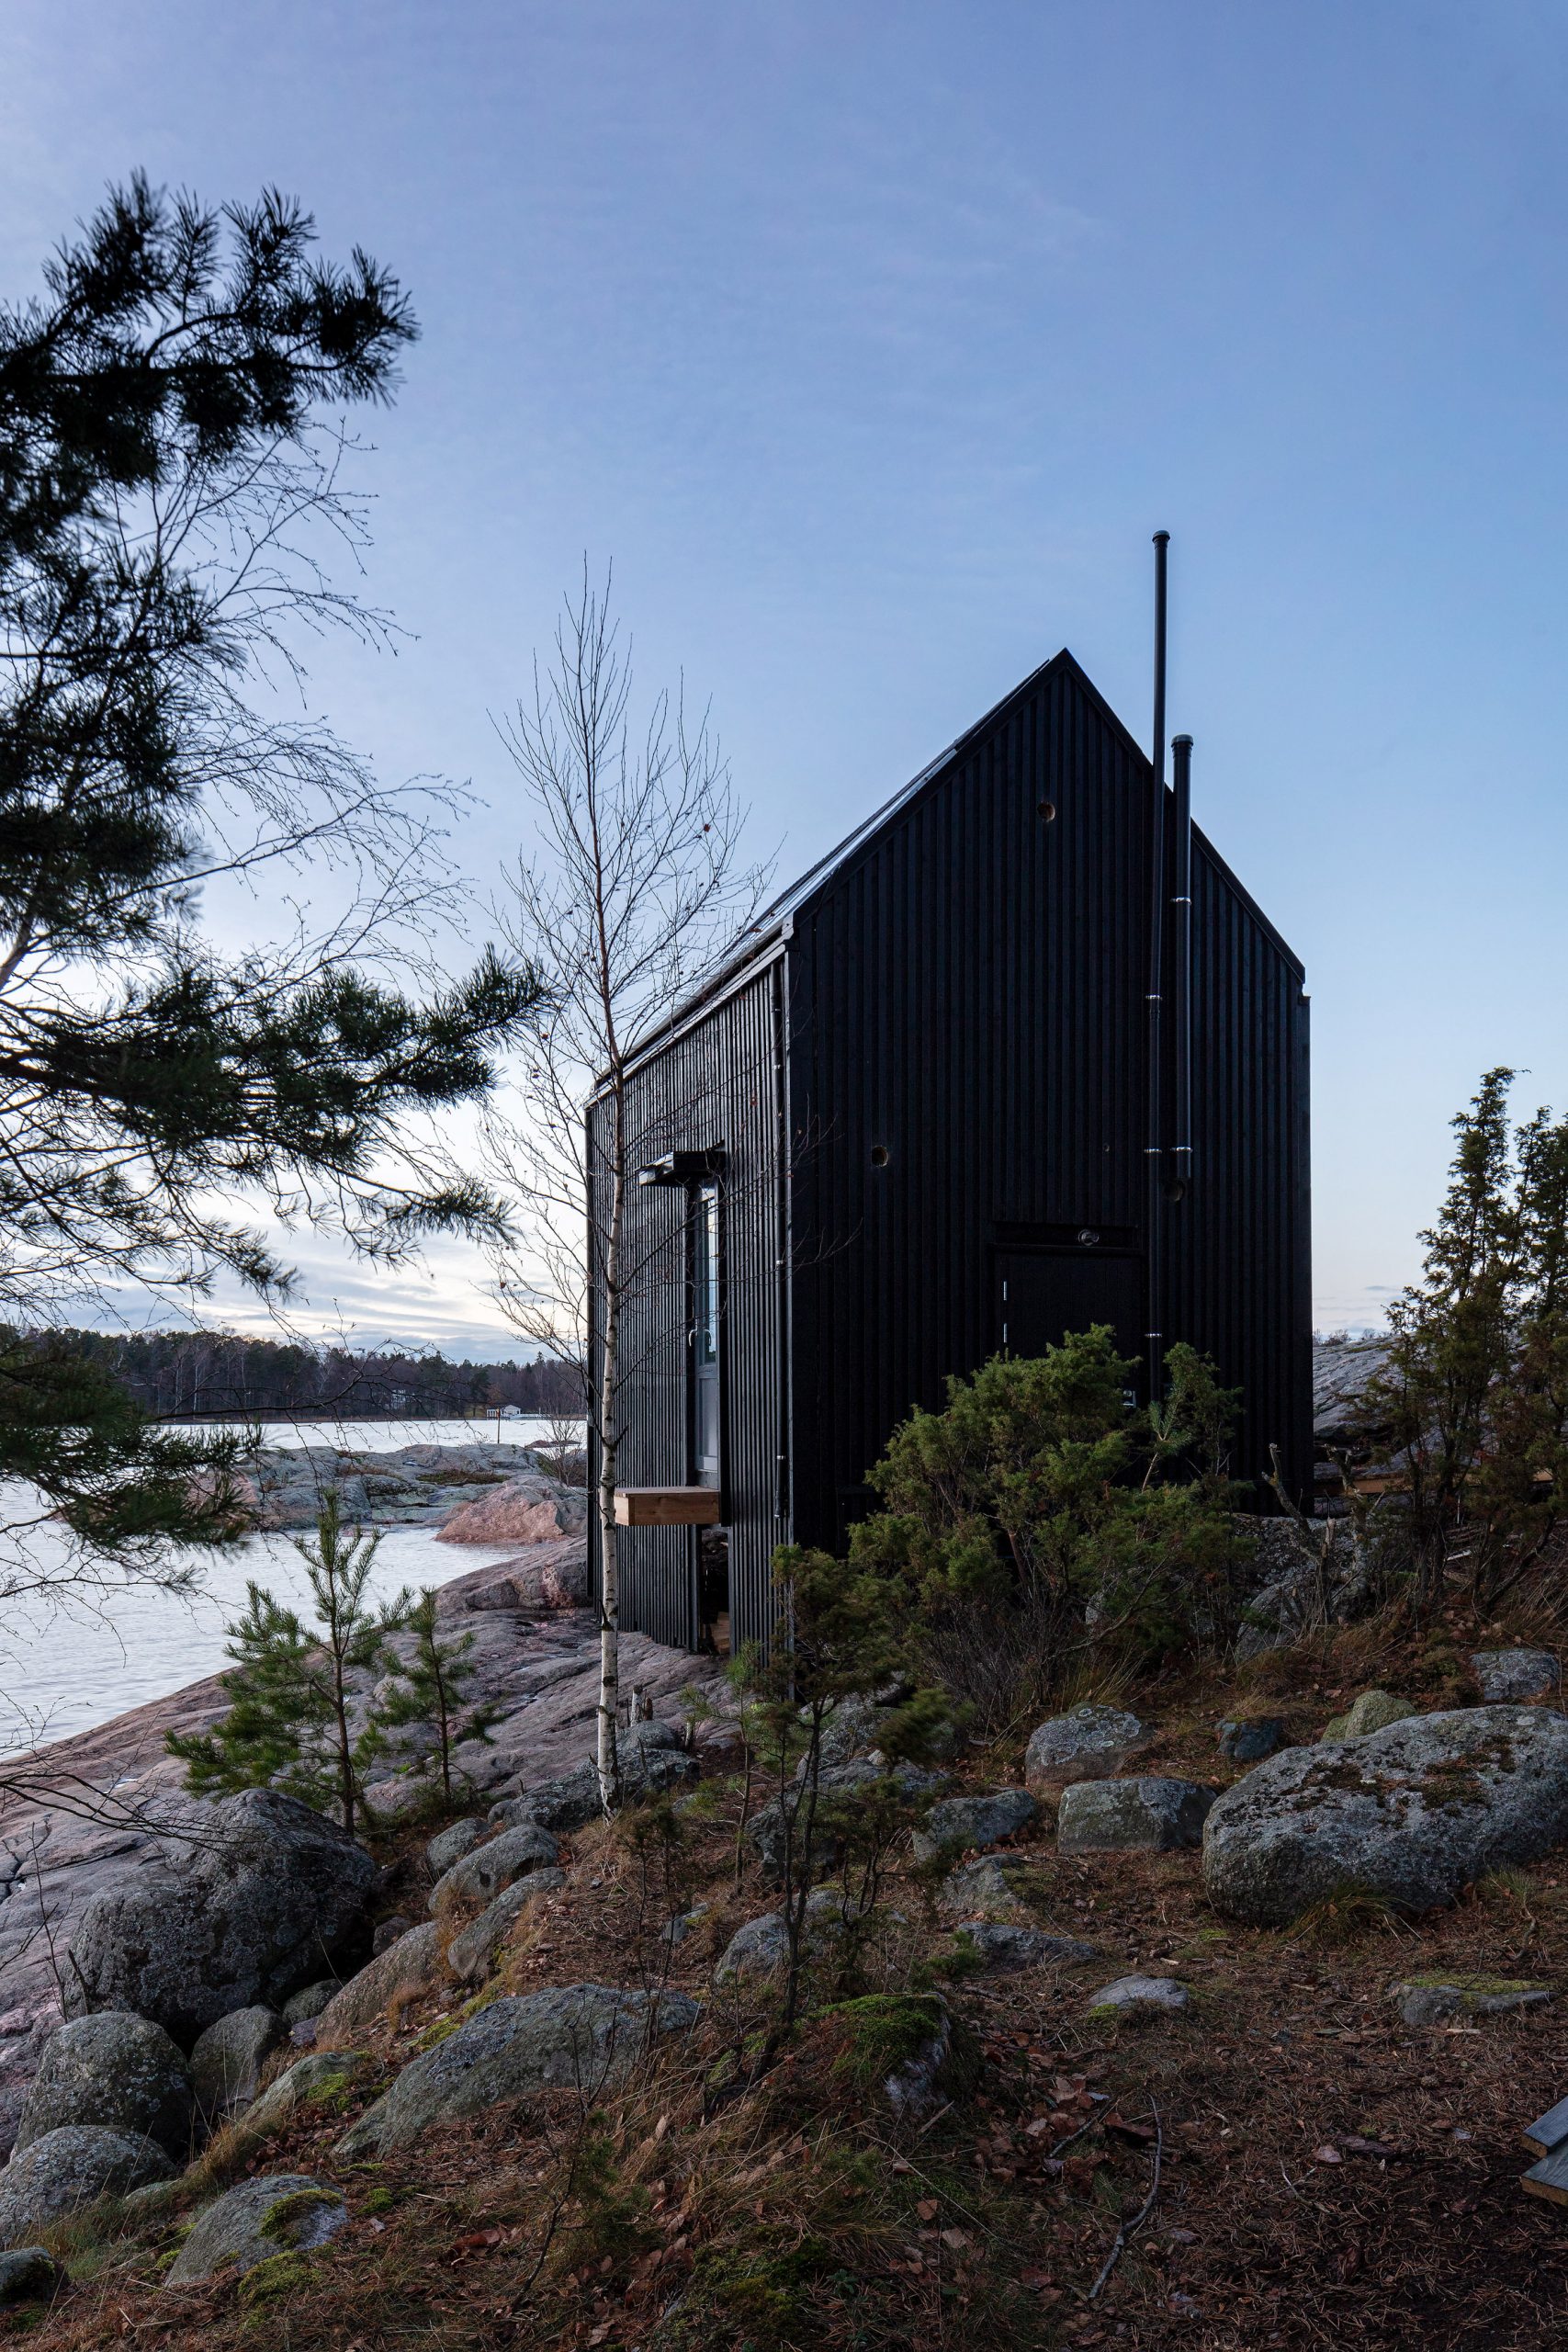 Exterior view of Majamaja, and off-grid cabin by Pekka Littow